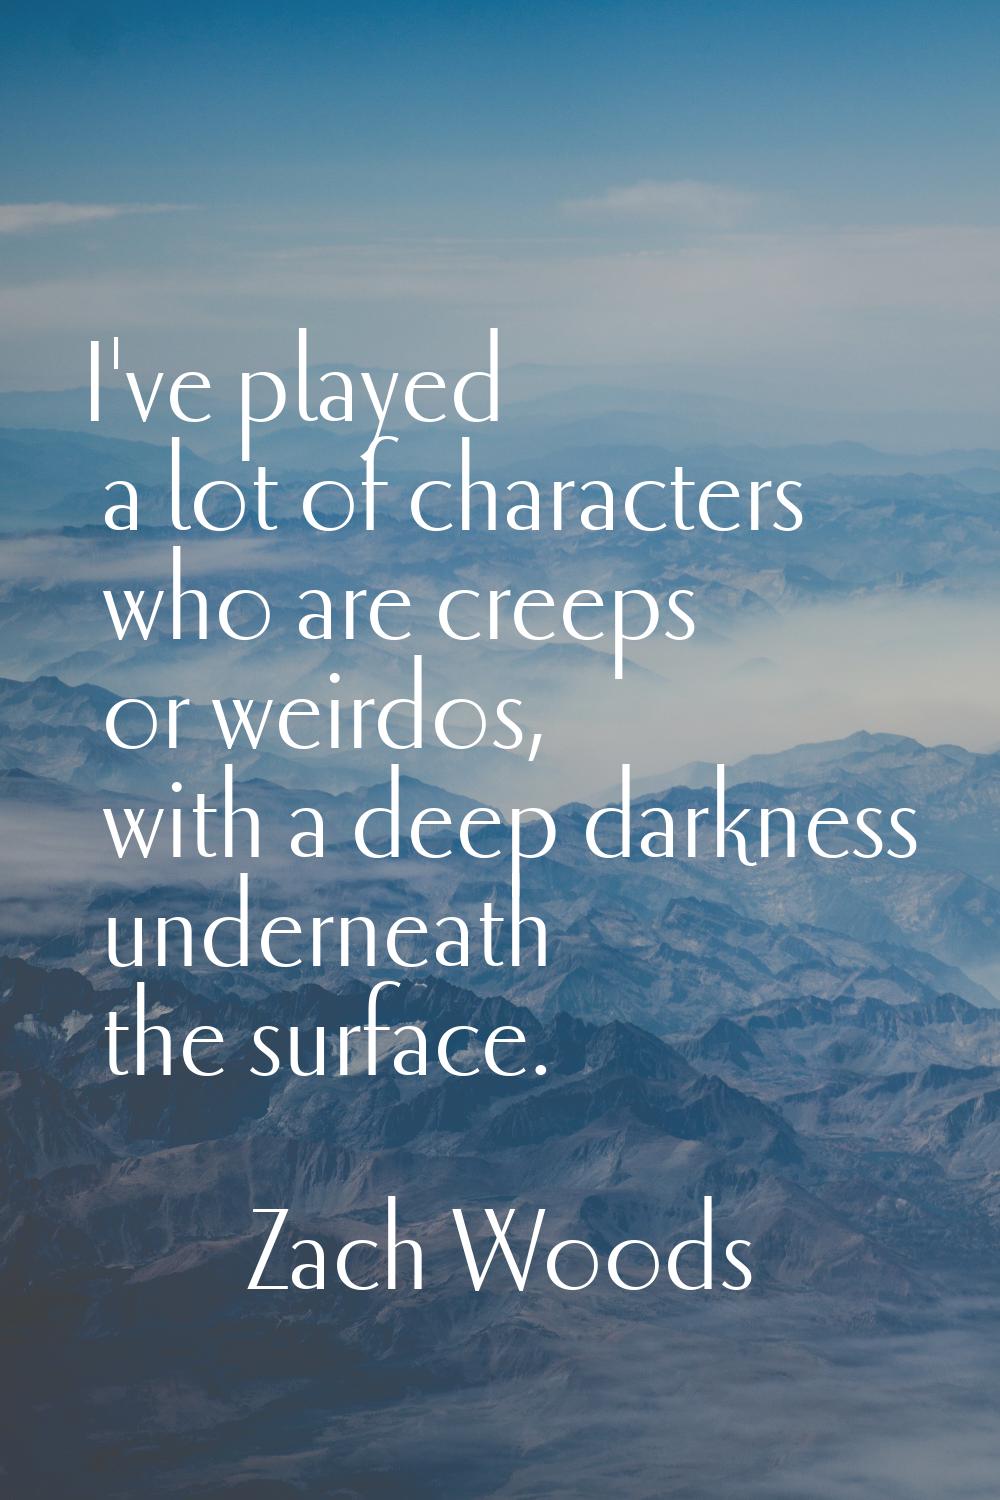 I've played a lot of characters who are creeps or weirdos, with a deep darkness underneath the surf